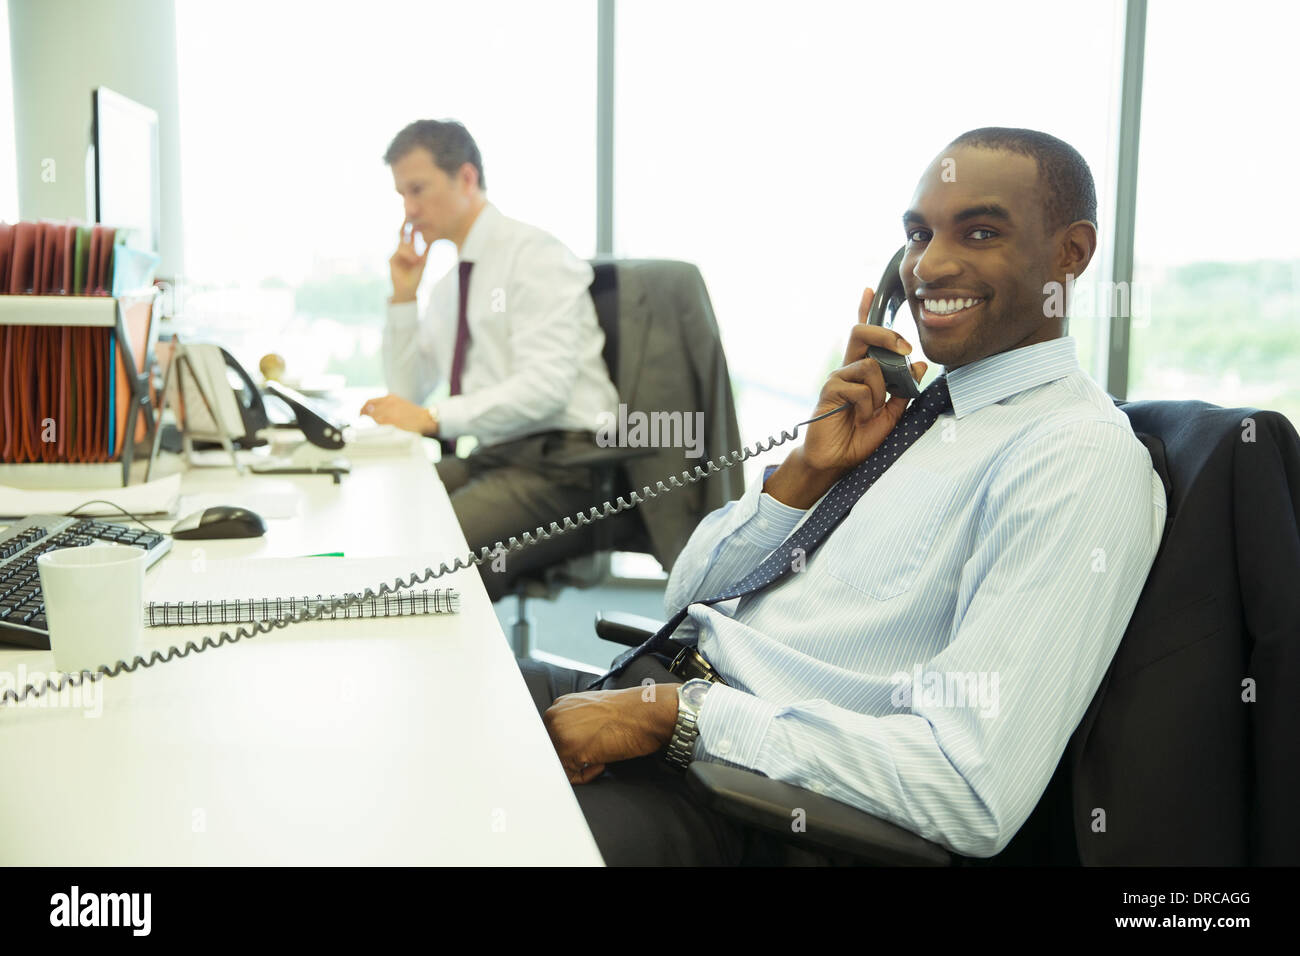 Businessman talking on telephone in office Banque D'Images